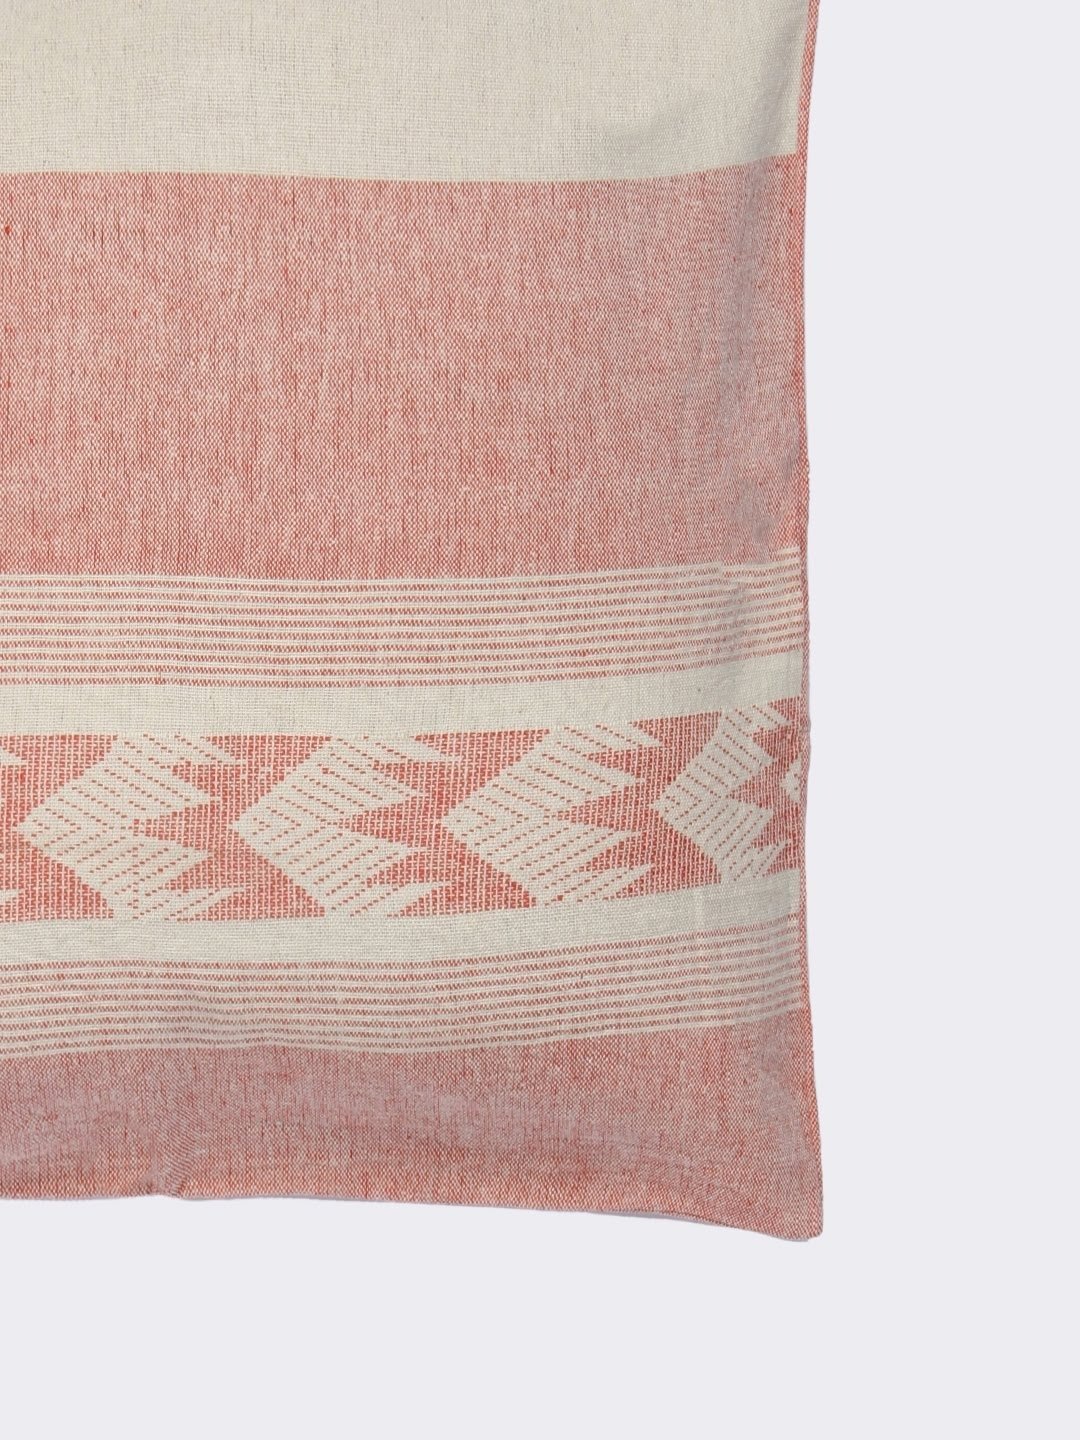 Handcrafted Pink Chevron Cotton Cushion Covers - Arteastri